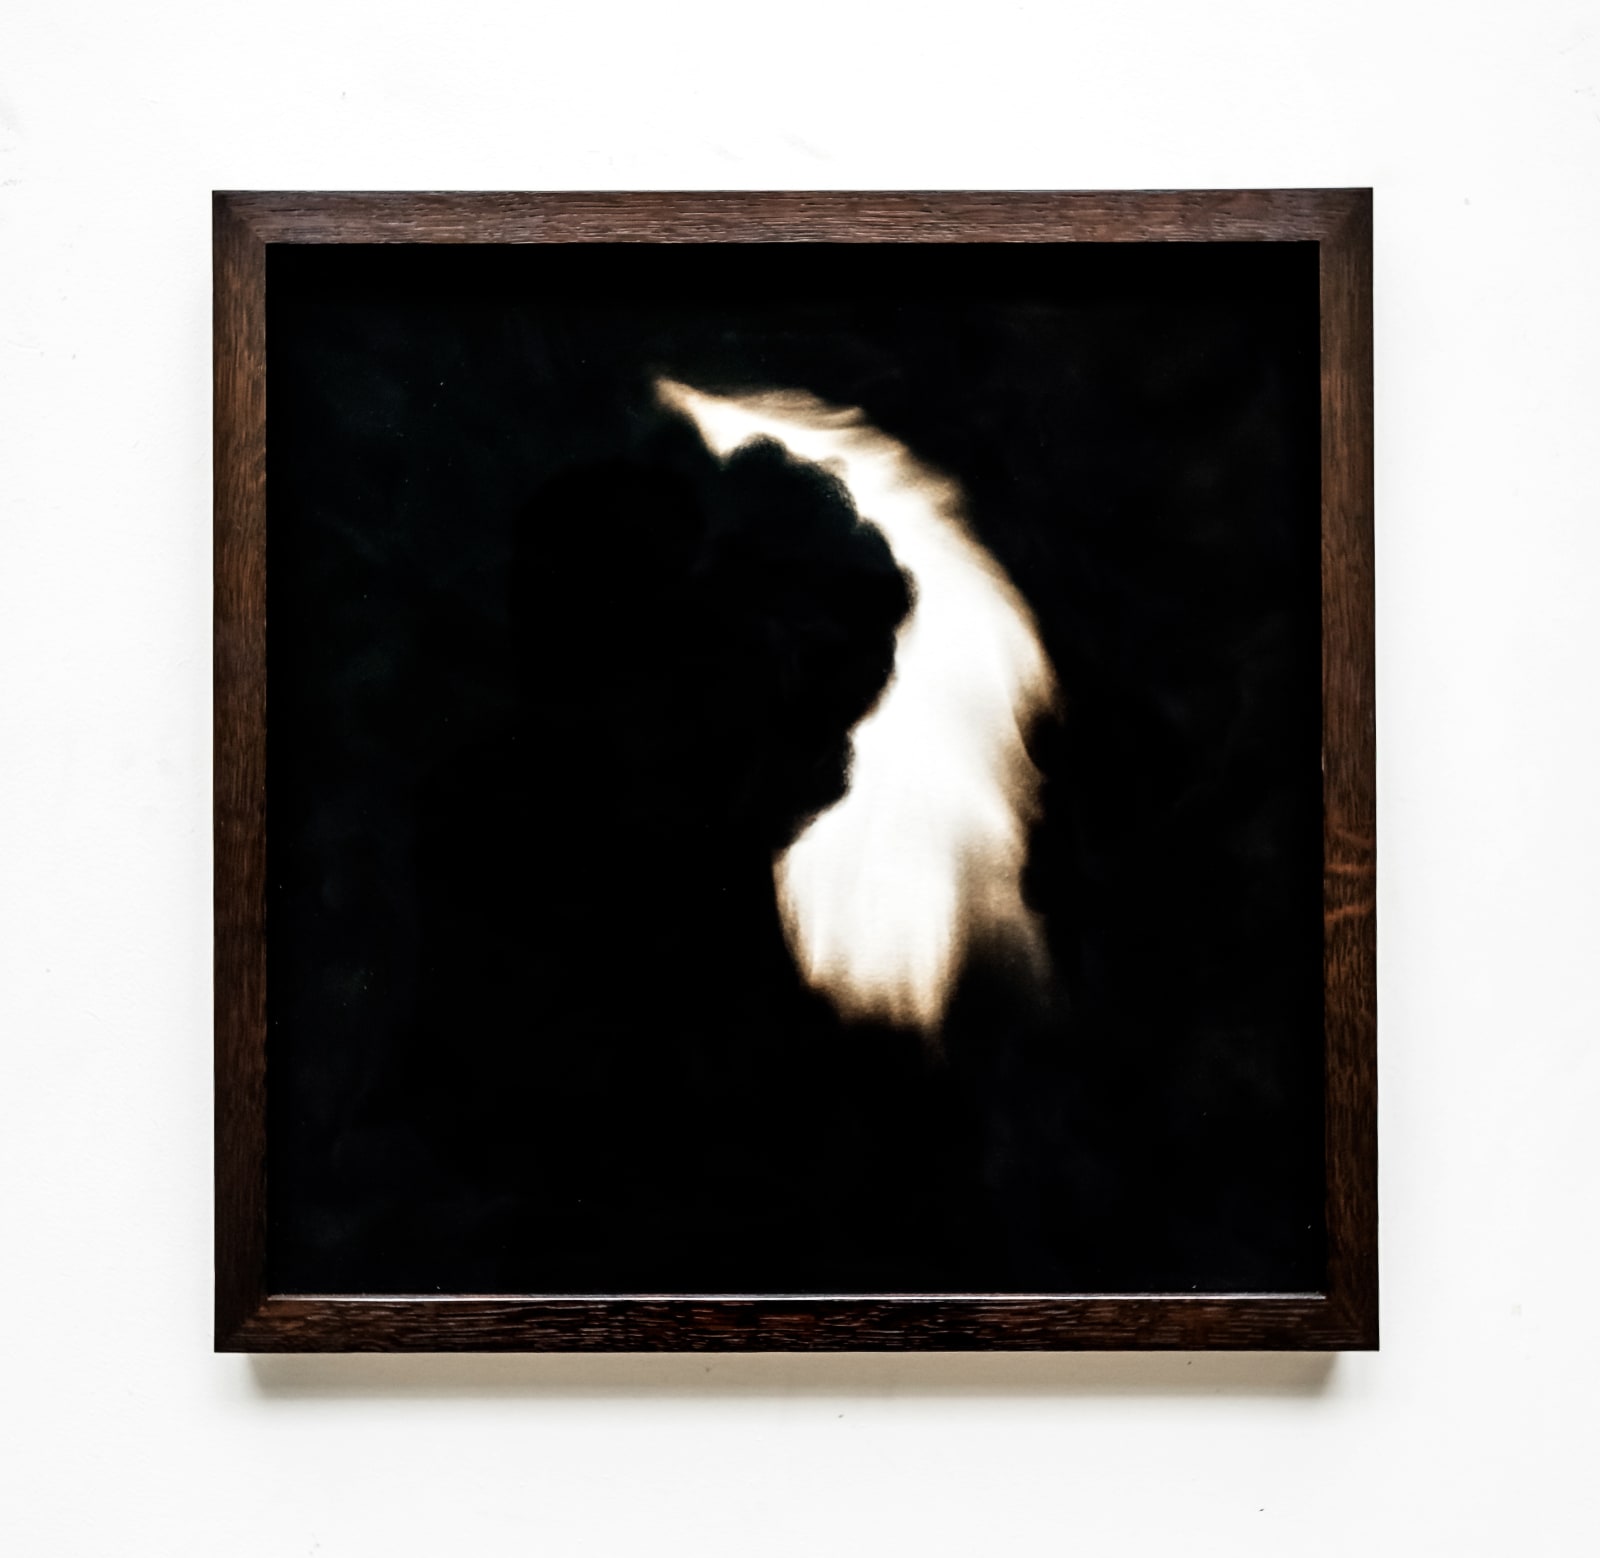 Guy Haddon Grant, Equivalent [no. 18], 2018 Candle soot on paper, each 43 x 43 cm